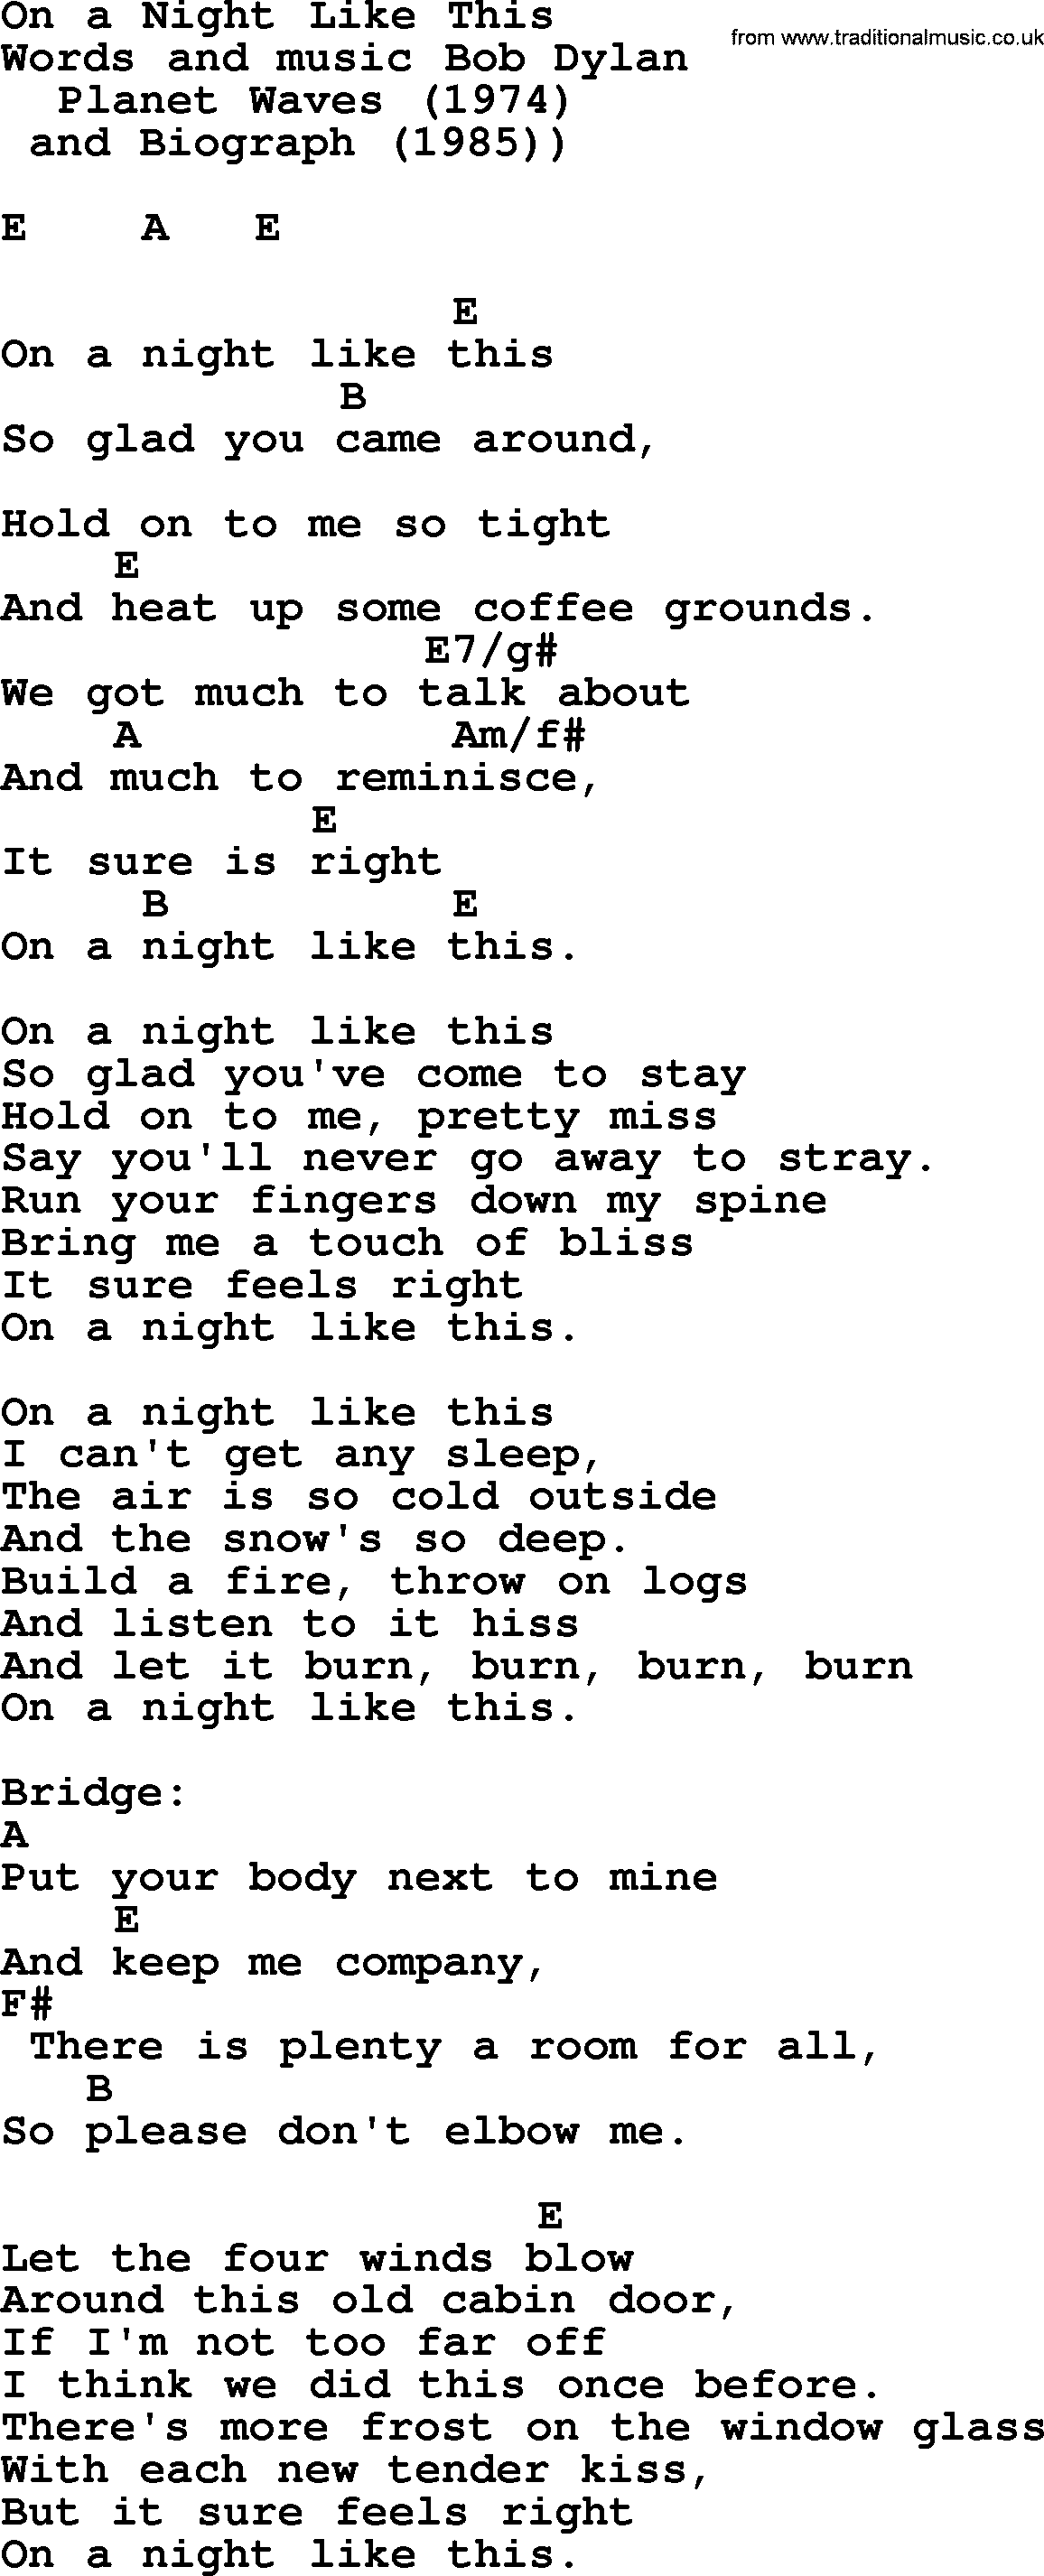 Bob Dylan song, lyrics with chords - On a Night Like This